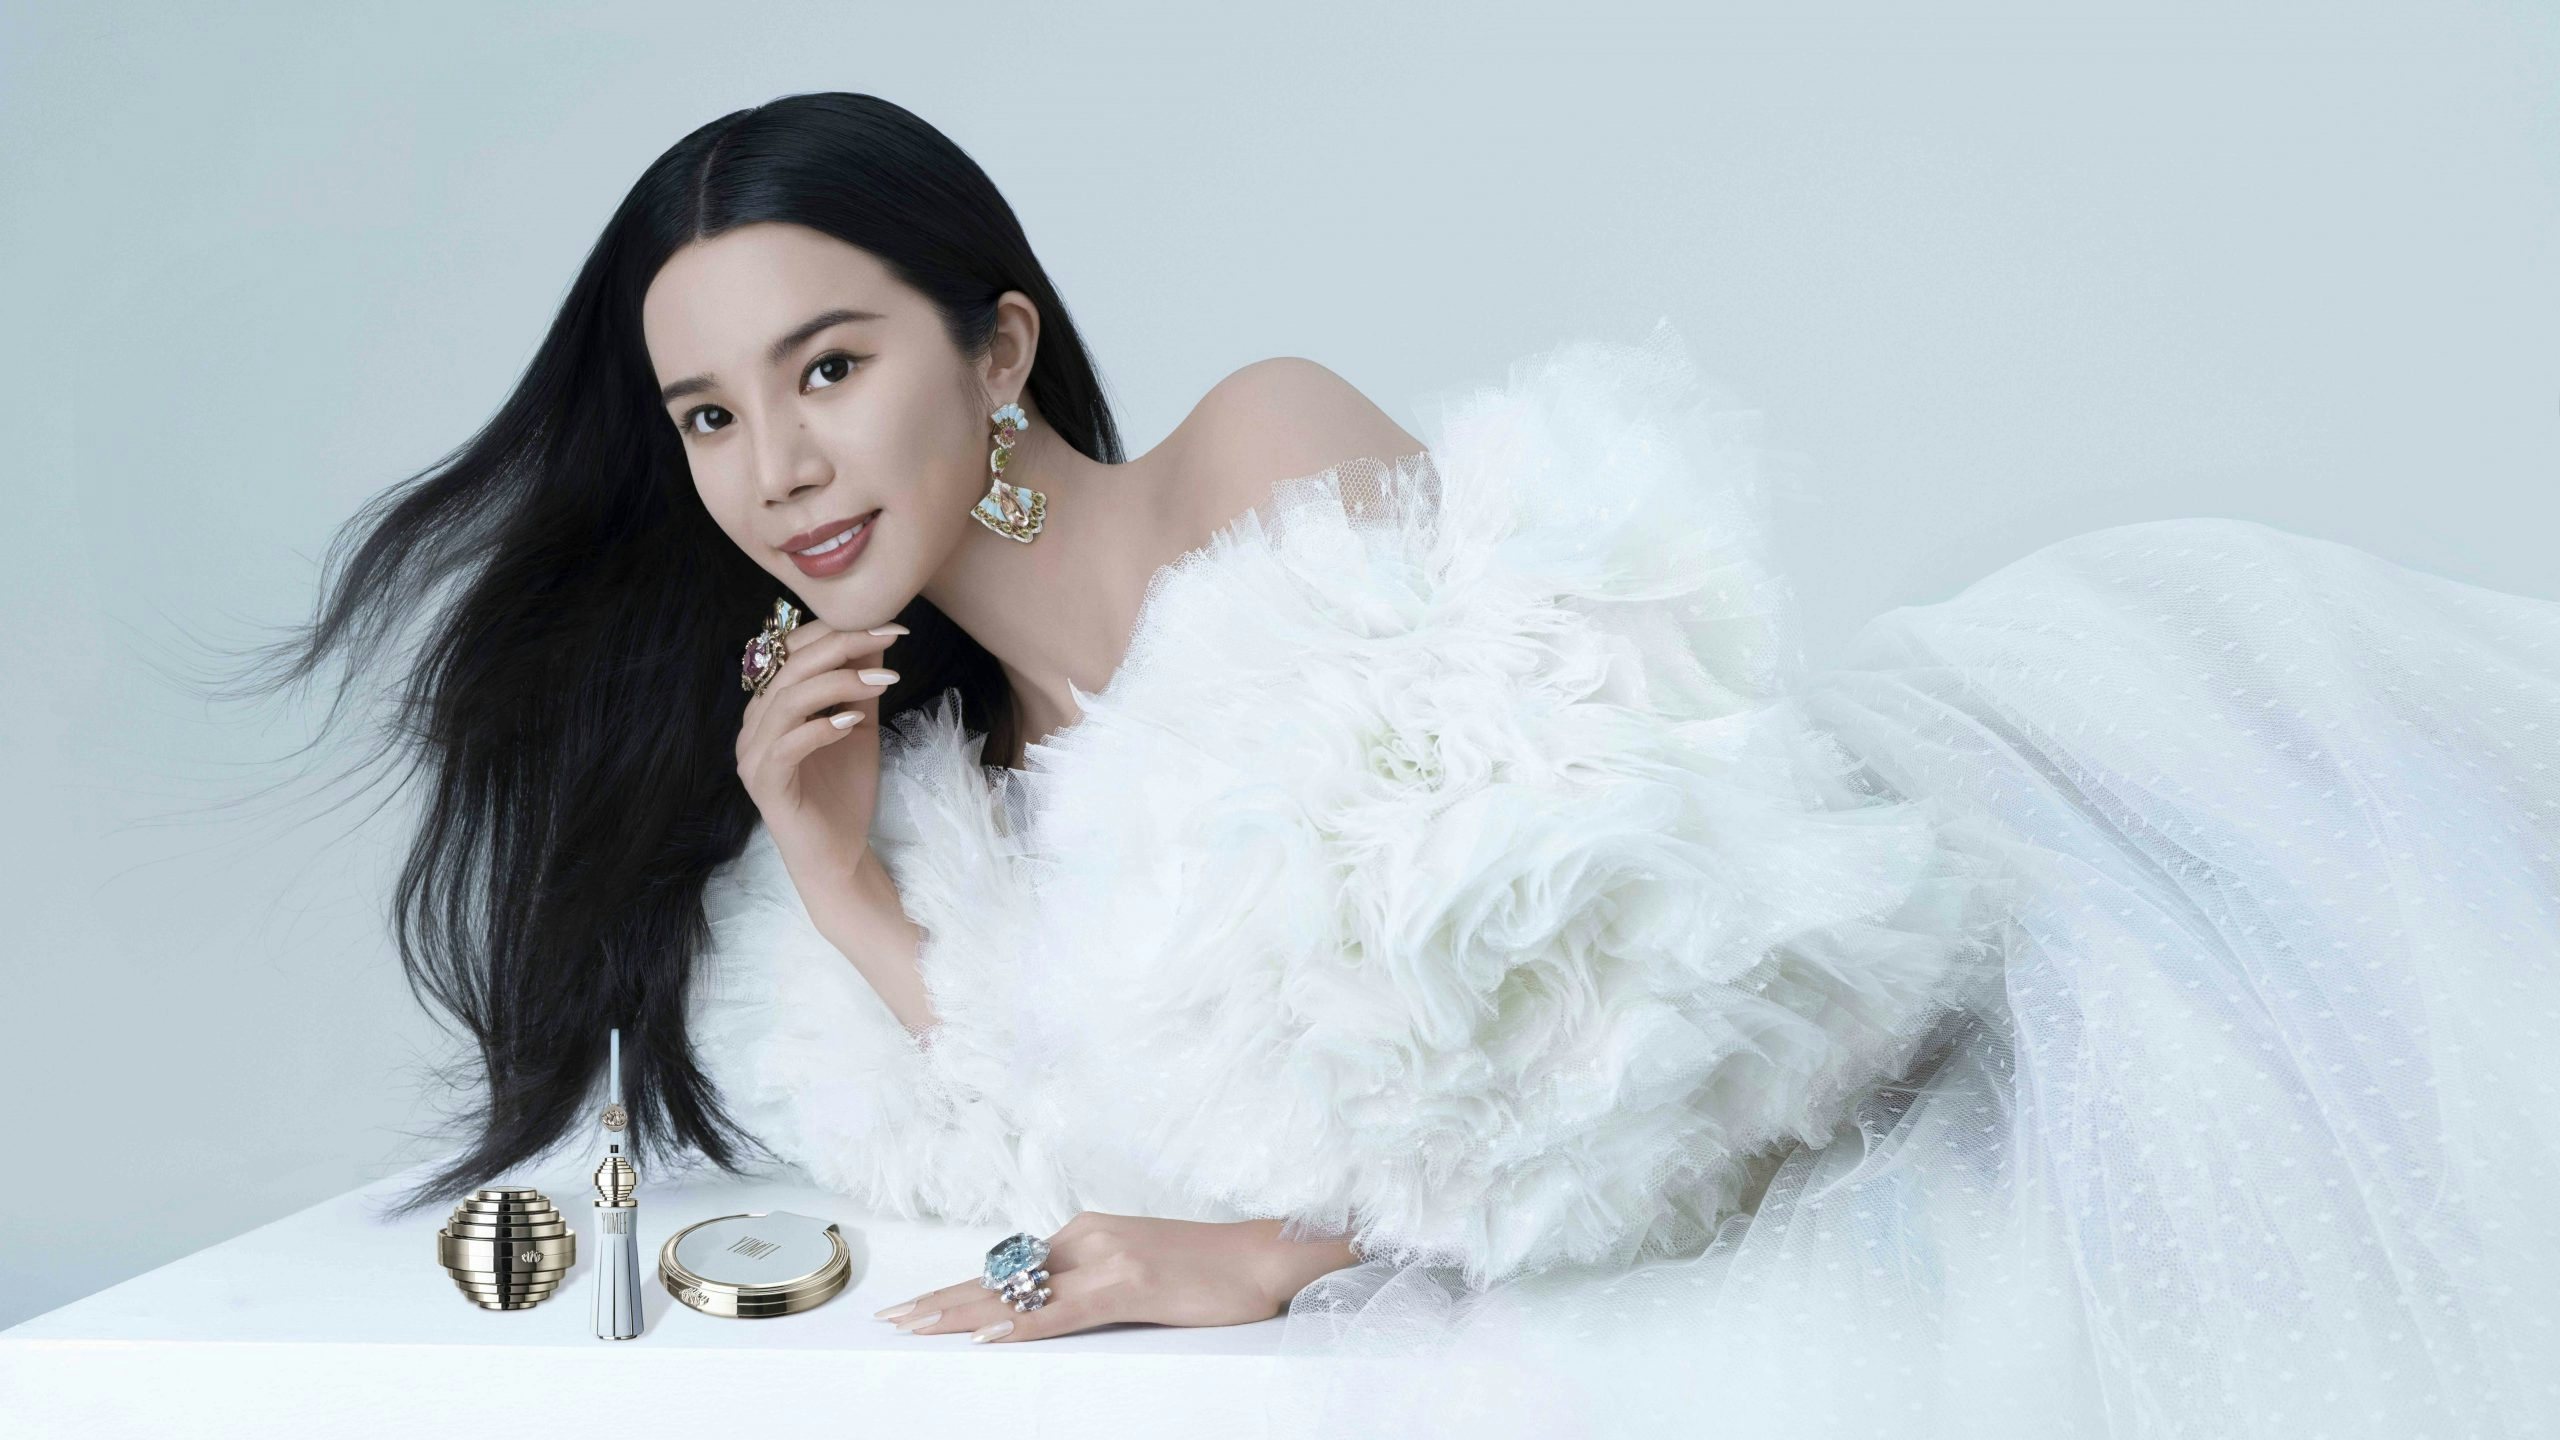 Financier Wendy Yu is taking on the global beauty world with the launch of in-house C-Beauty luxury makeup line, YUMEE. Photo: Courtesy/Chen Man